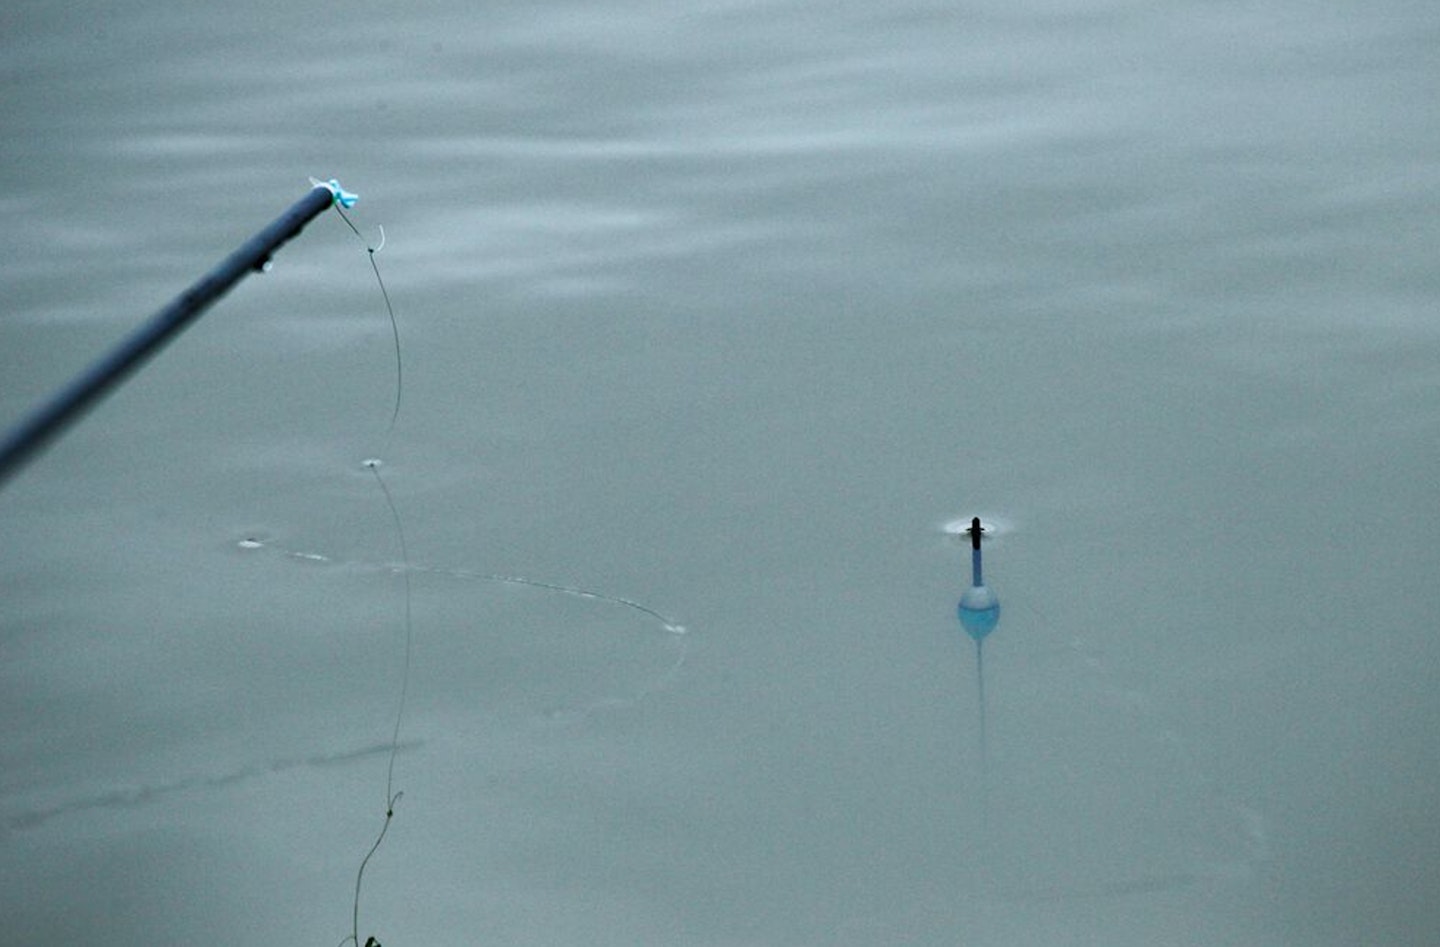 A common mistake many pole anglers make is to leave too much float tip showing